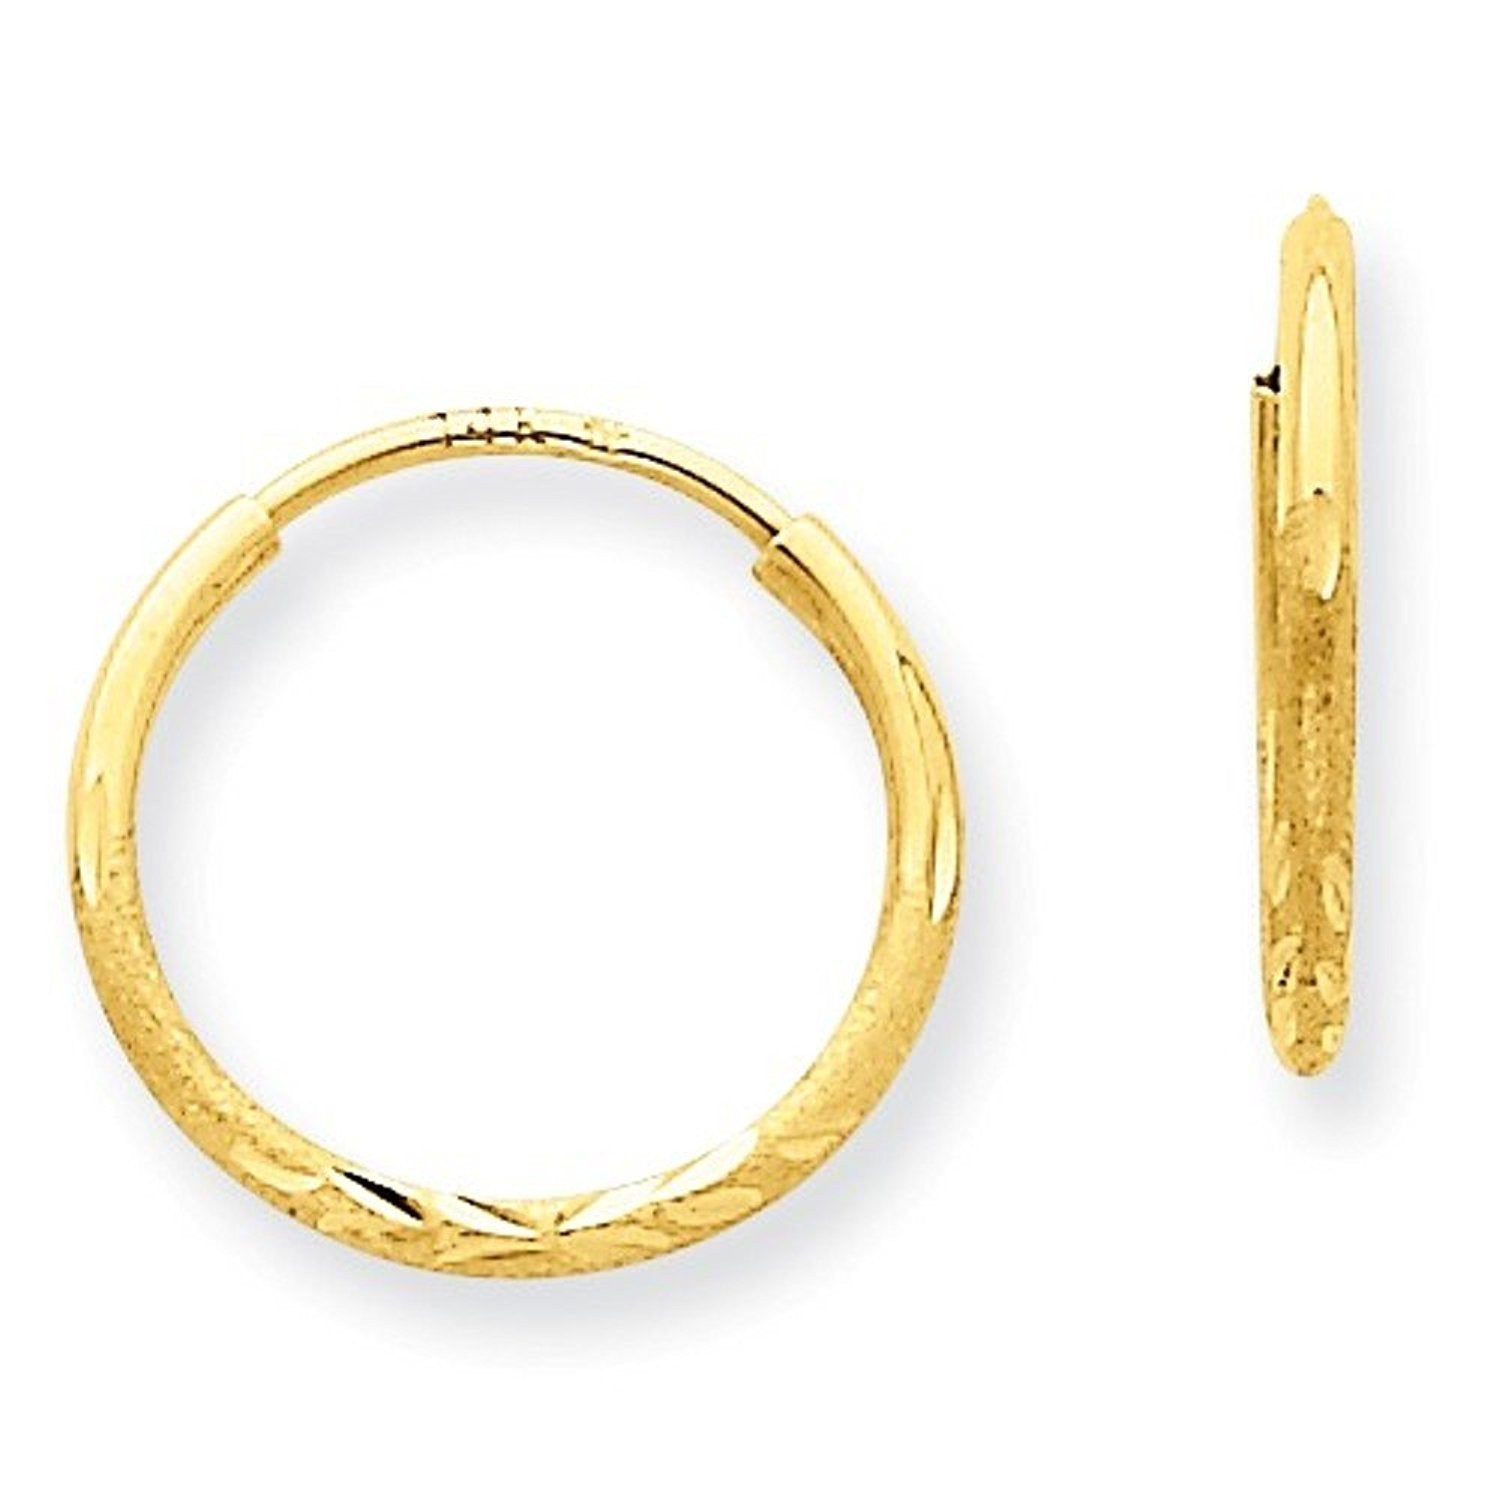 14K Yellow Gold 12mm x 1.25mm Round Endless Hoop Earrings